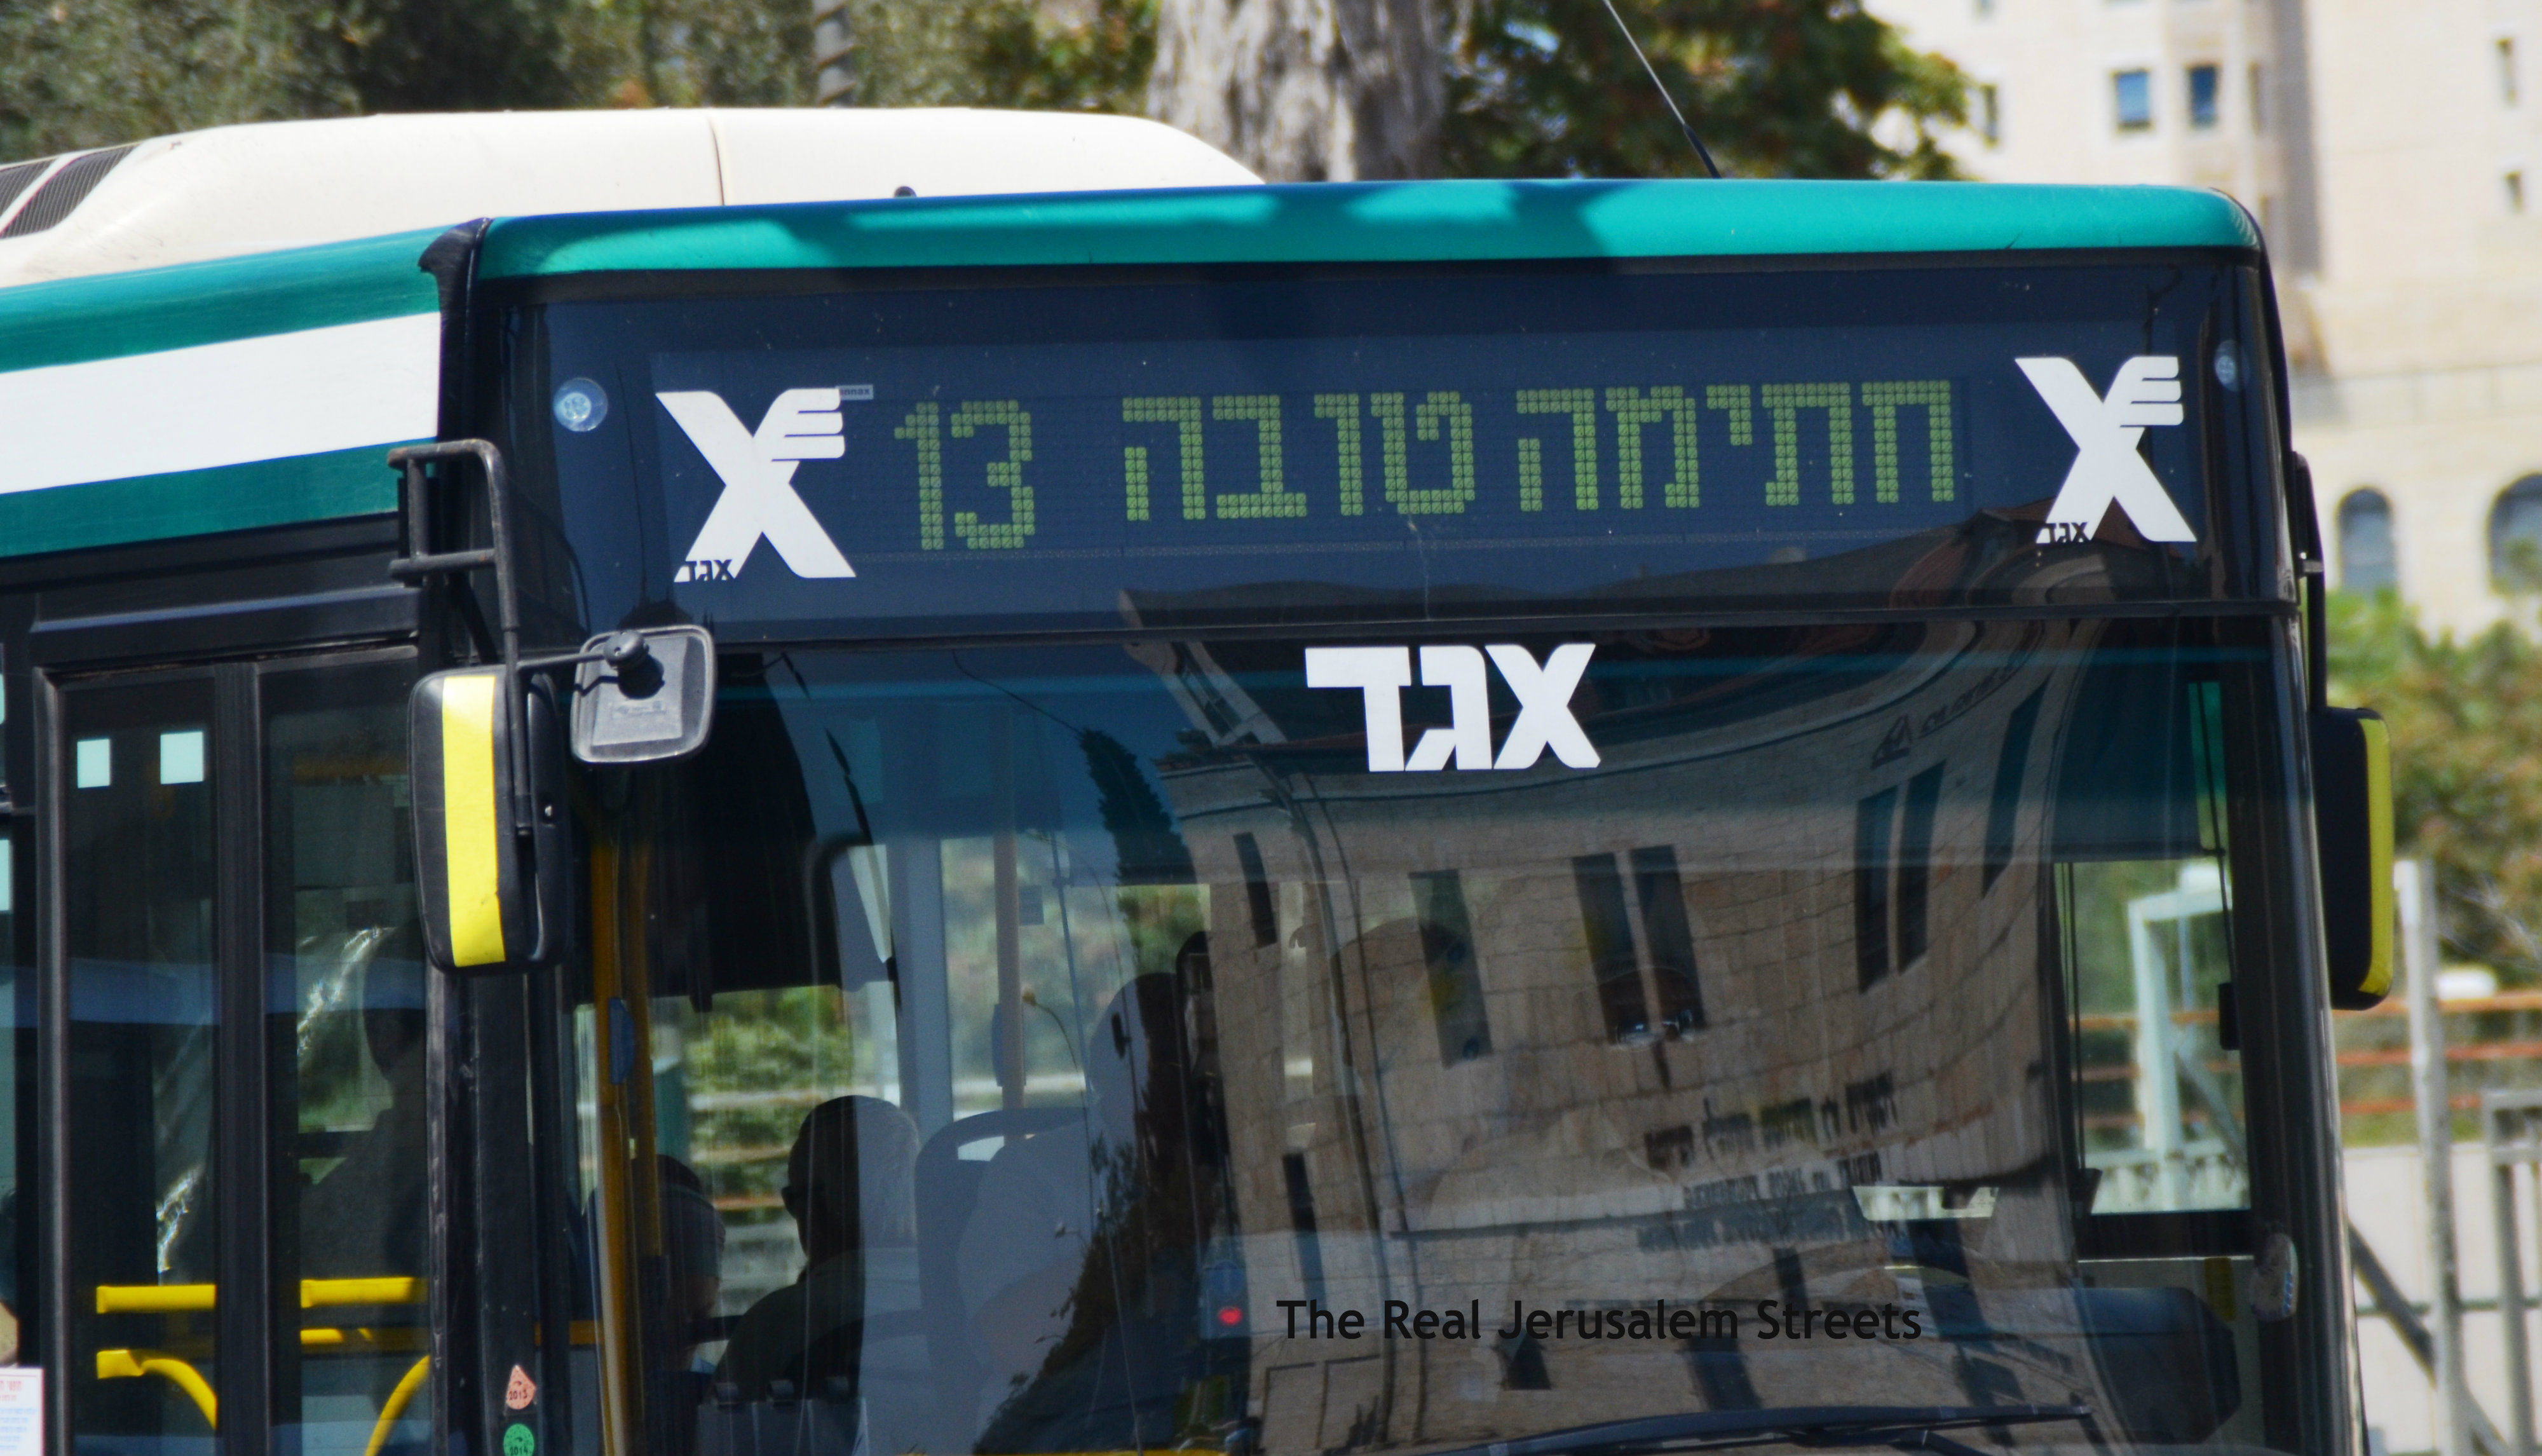 Yom Kippur photo, bus with sign for holiday